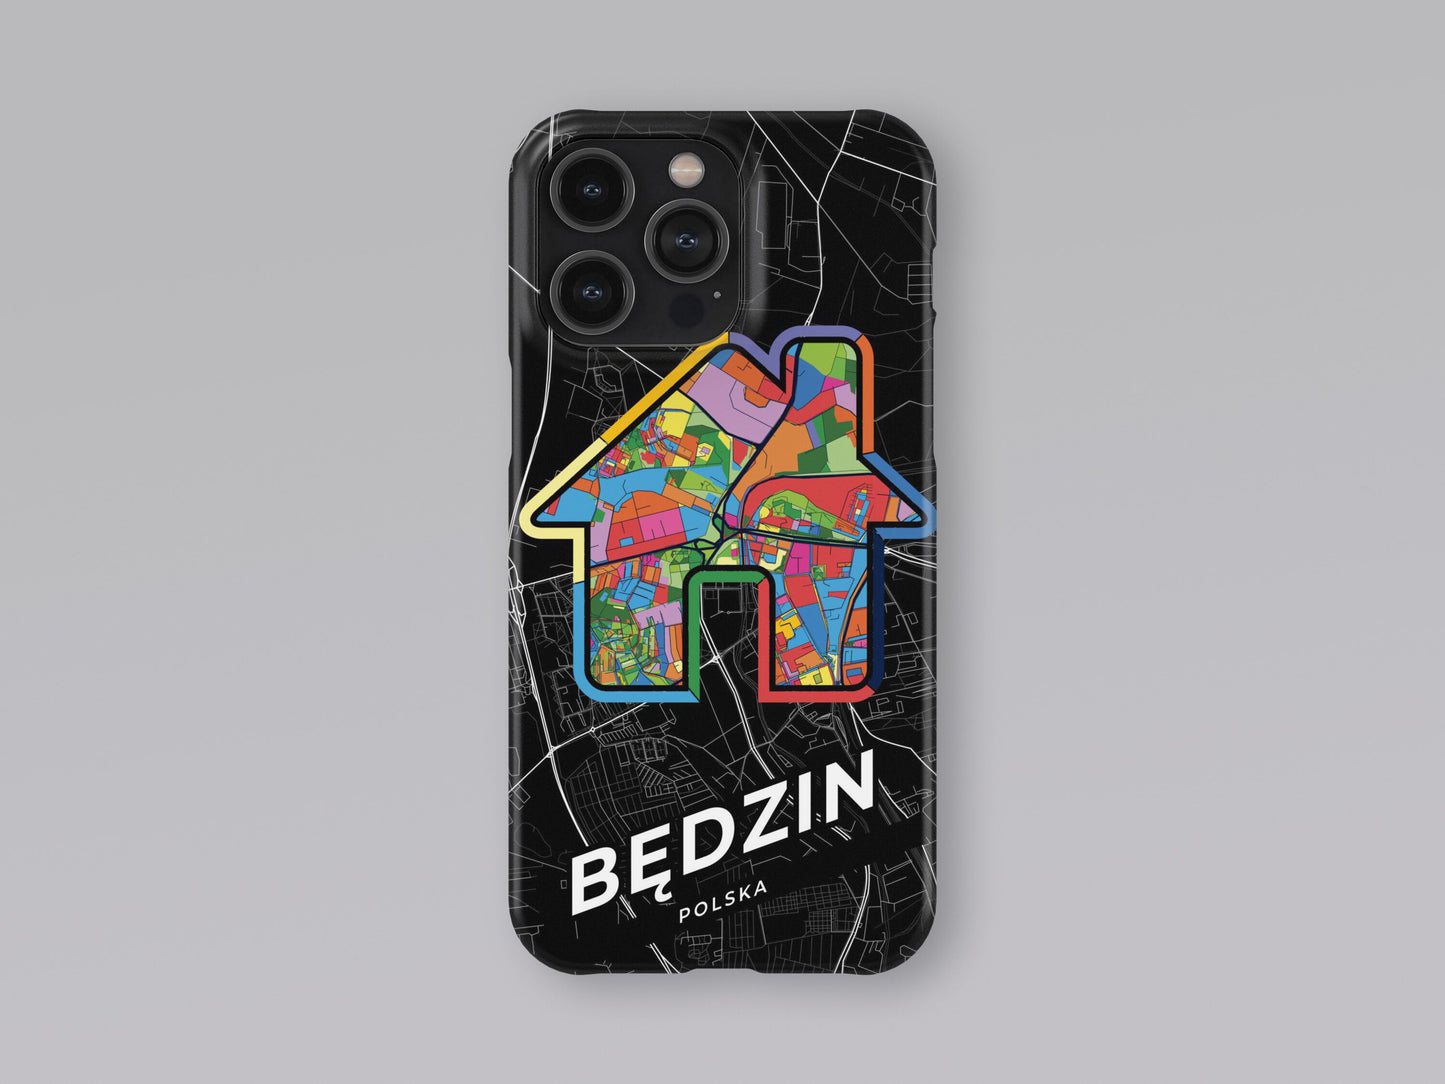 Będzin Poland slim phone case with colorful icon. Birthday, wedding or housewarming gift. Couple match cases. 3